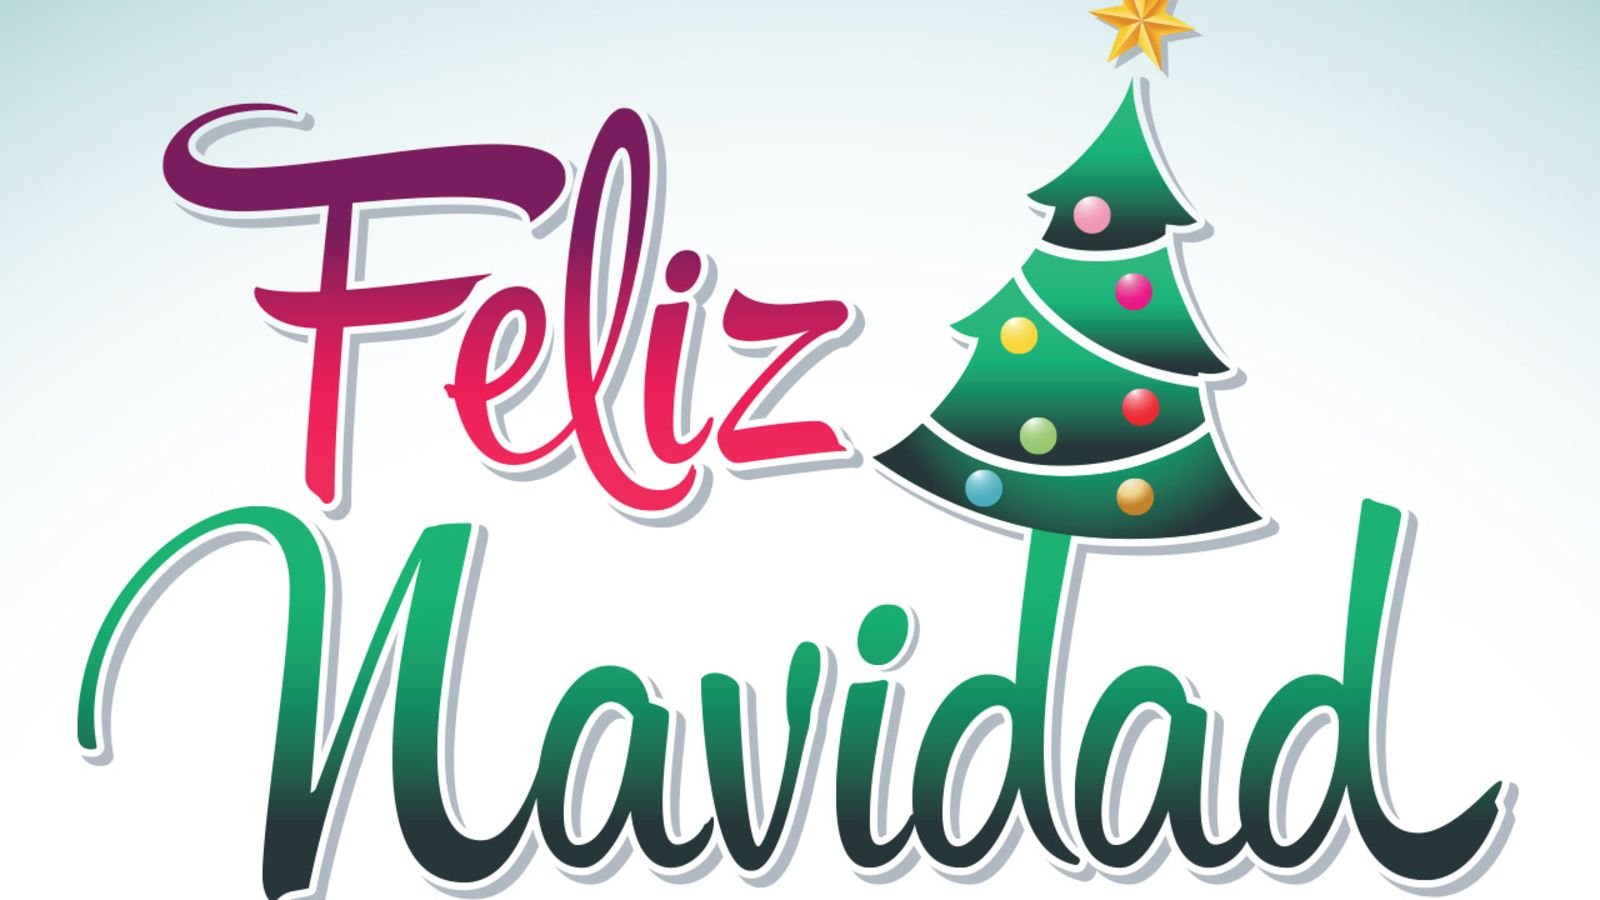 Tons of awesome Feliz Navidad wallpapers to download for free. 